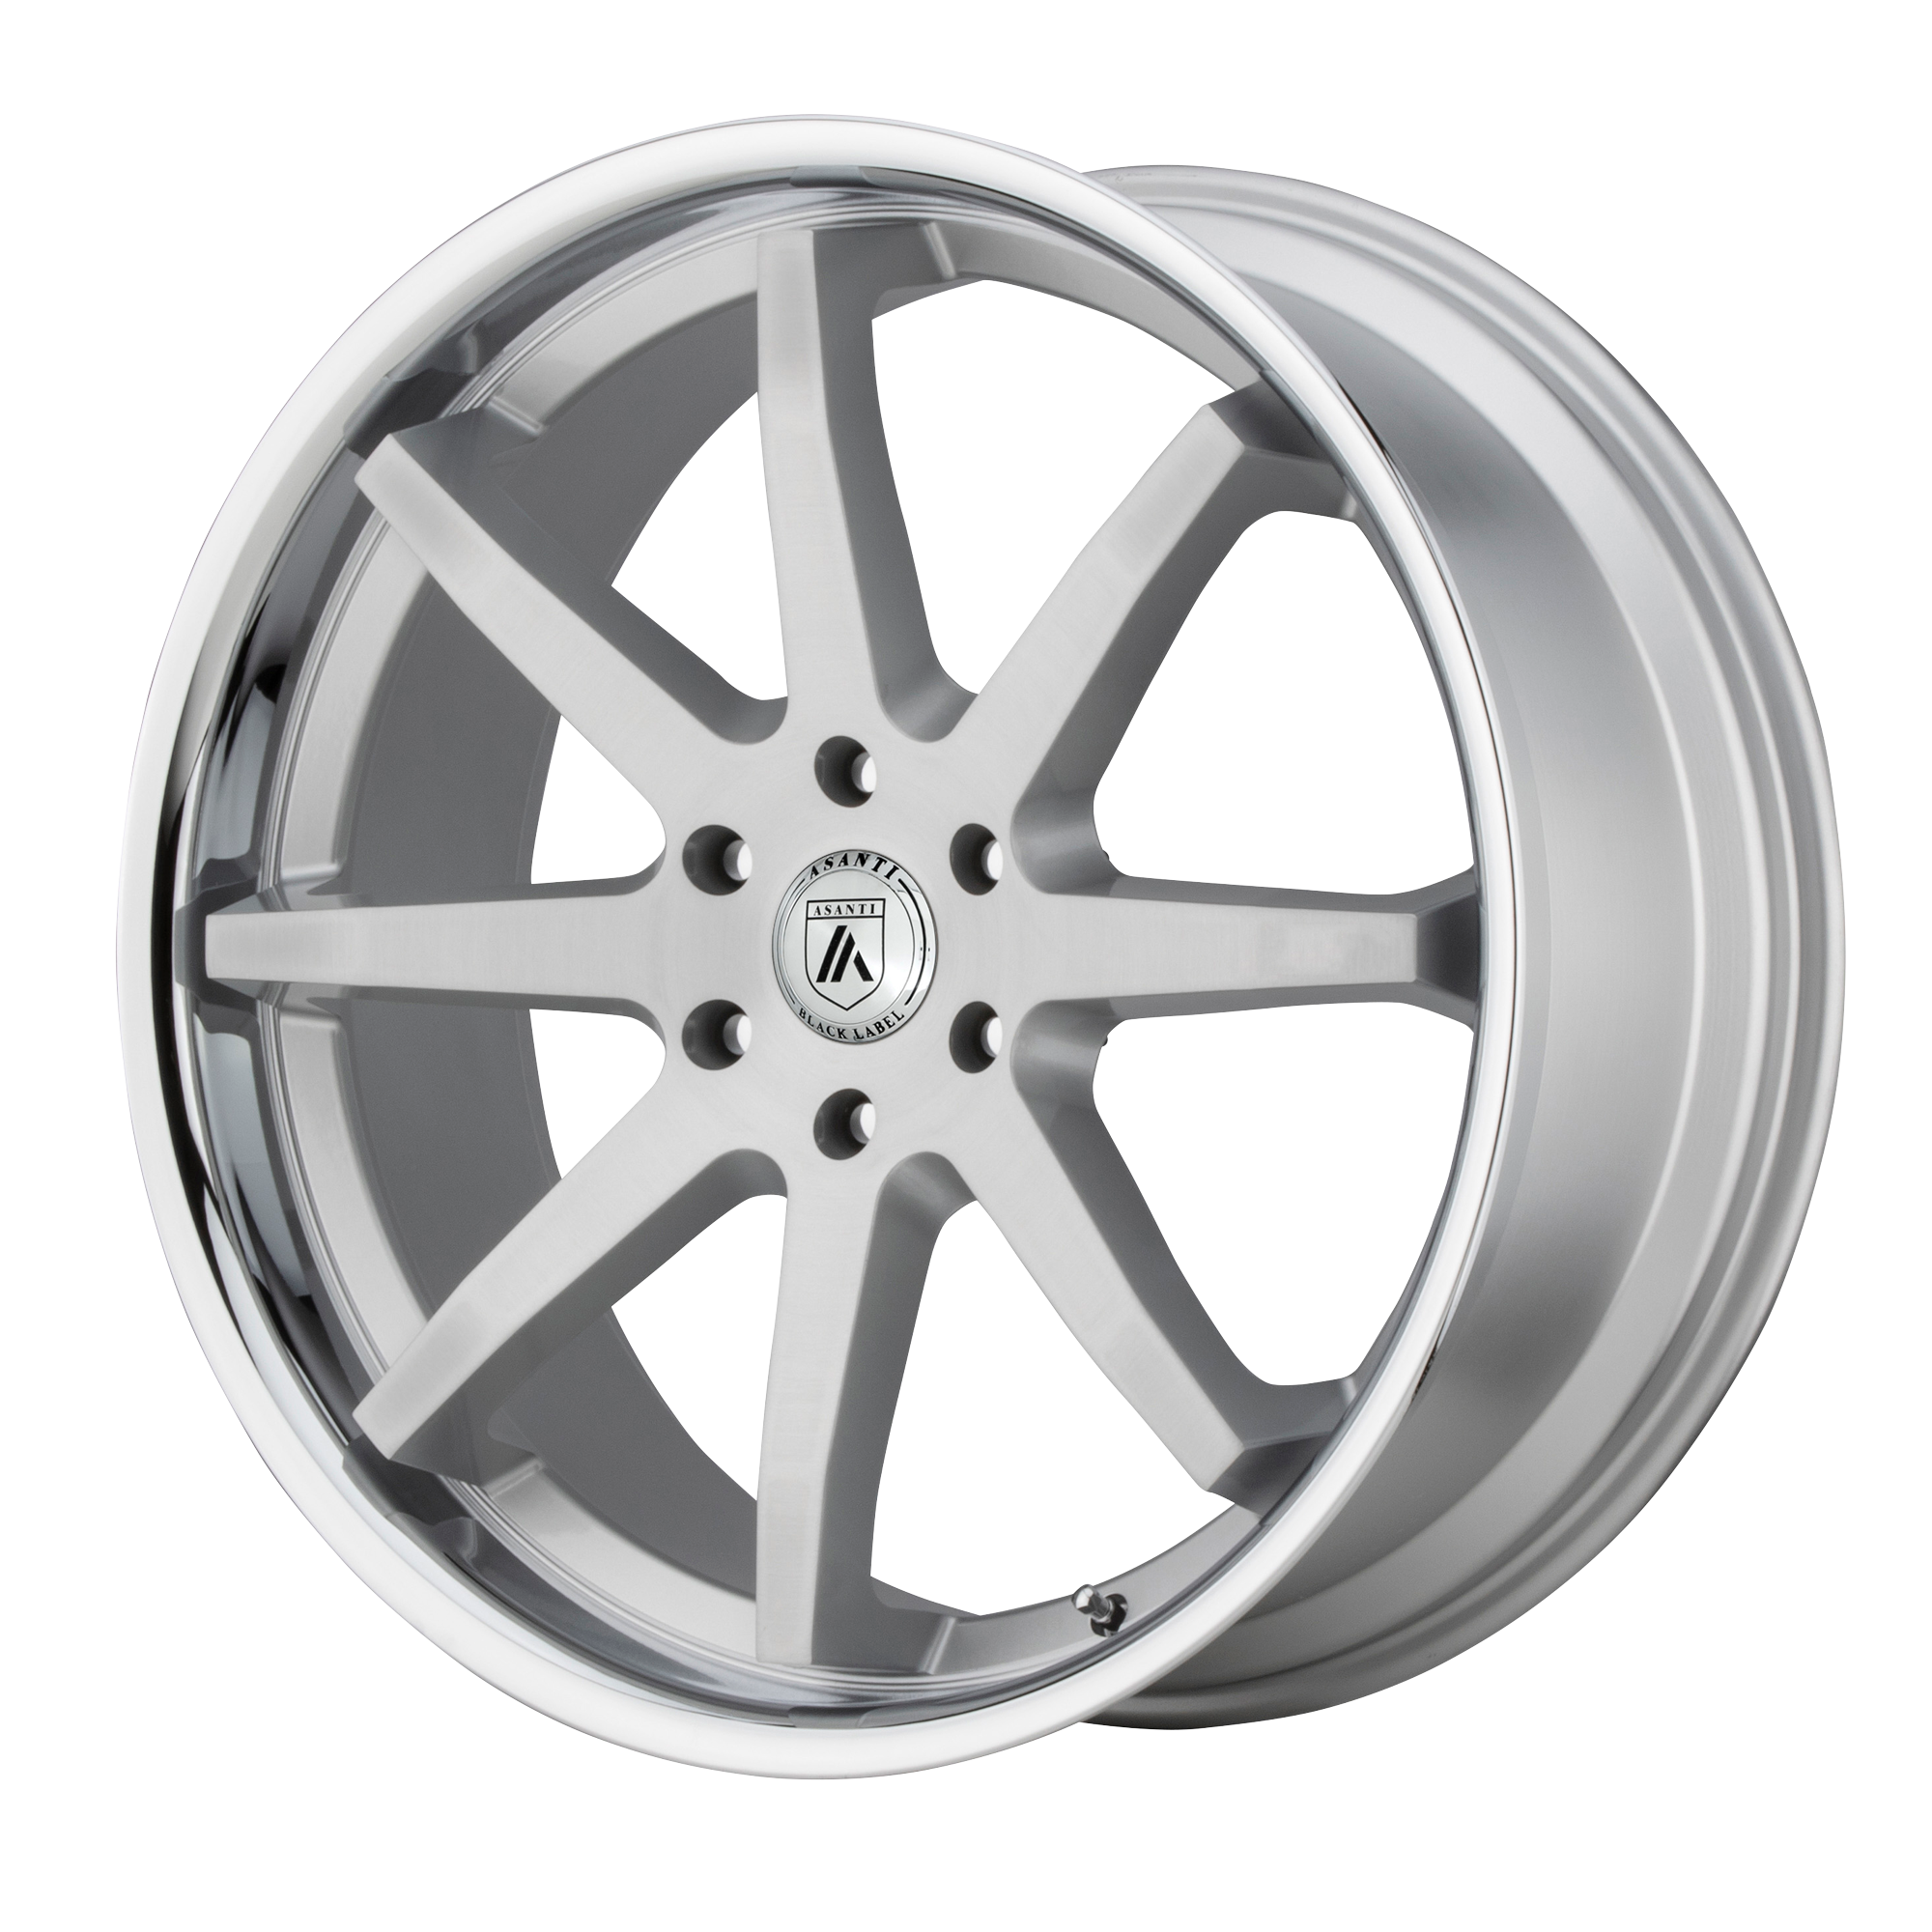 KAISER 24x10 6x139.70 BRUSHED SILVER W/ CHROME LIP (30 mm) - Tires and Engine Performance